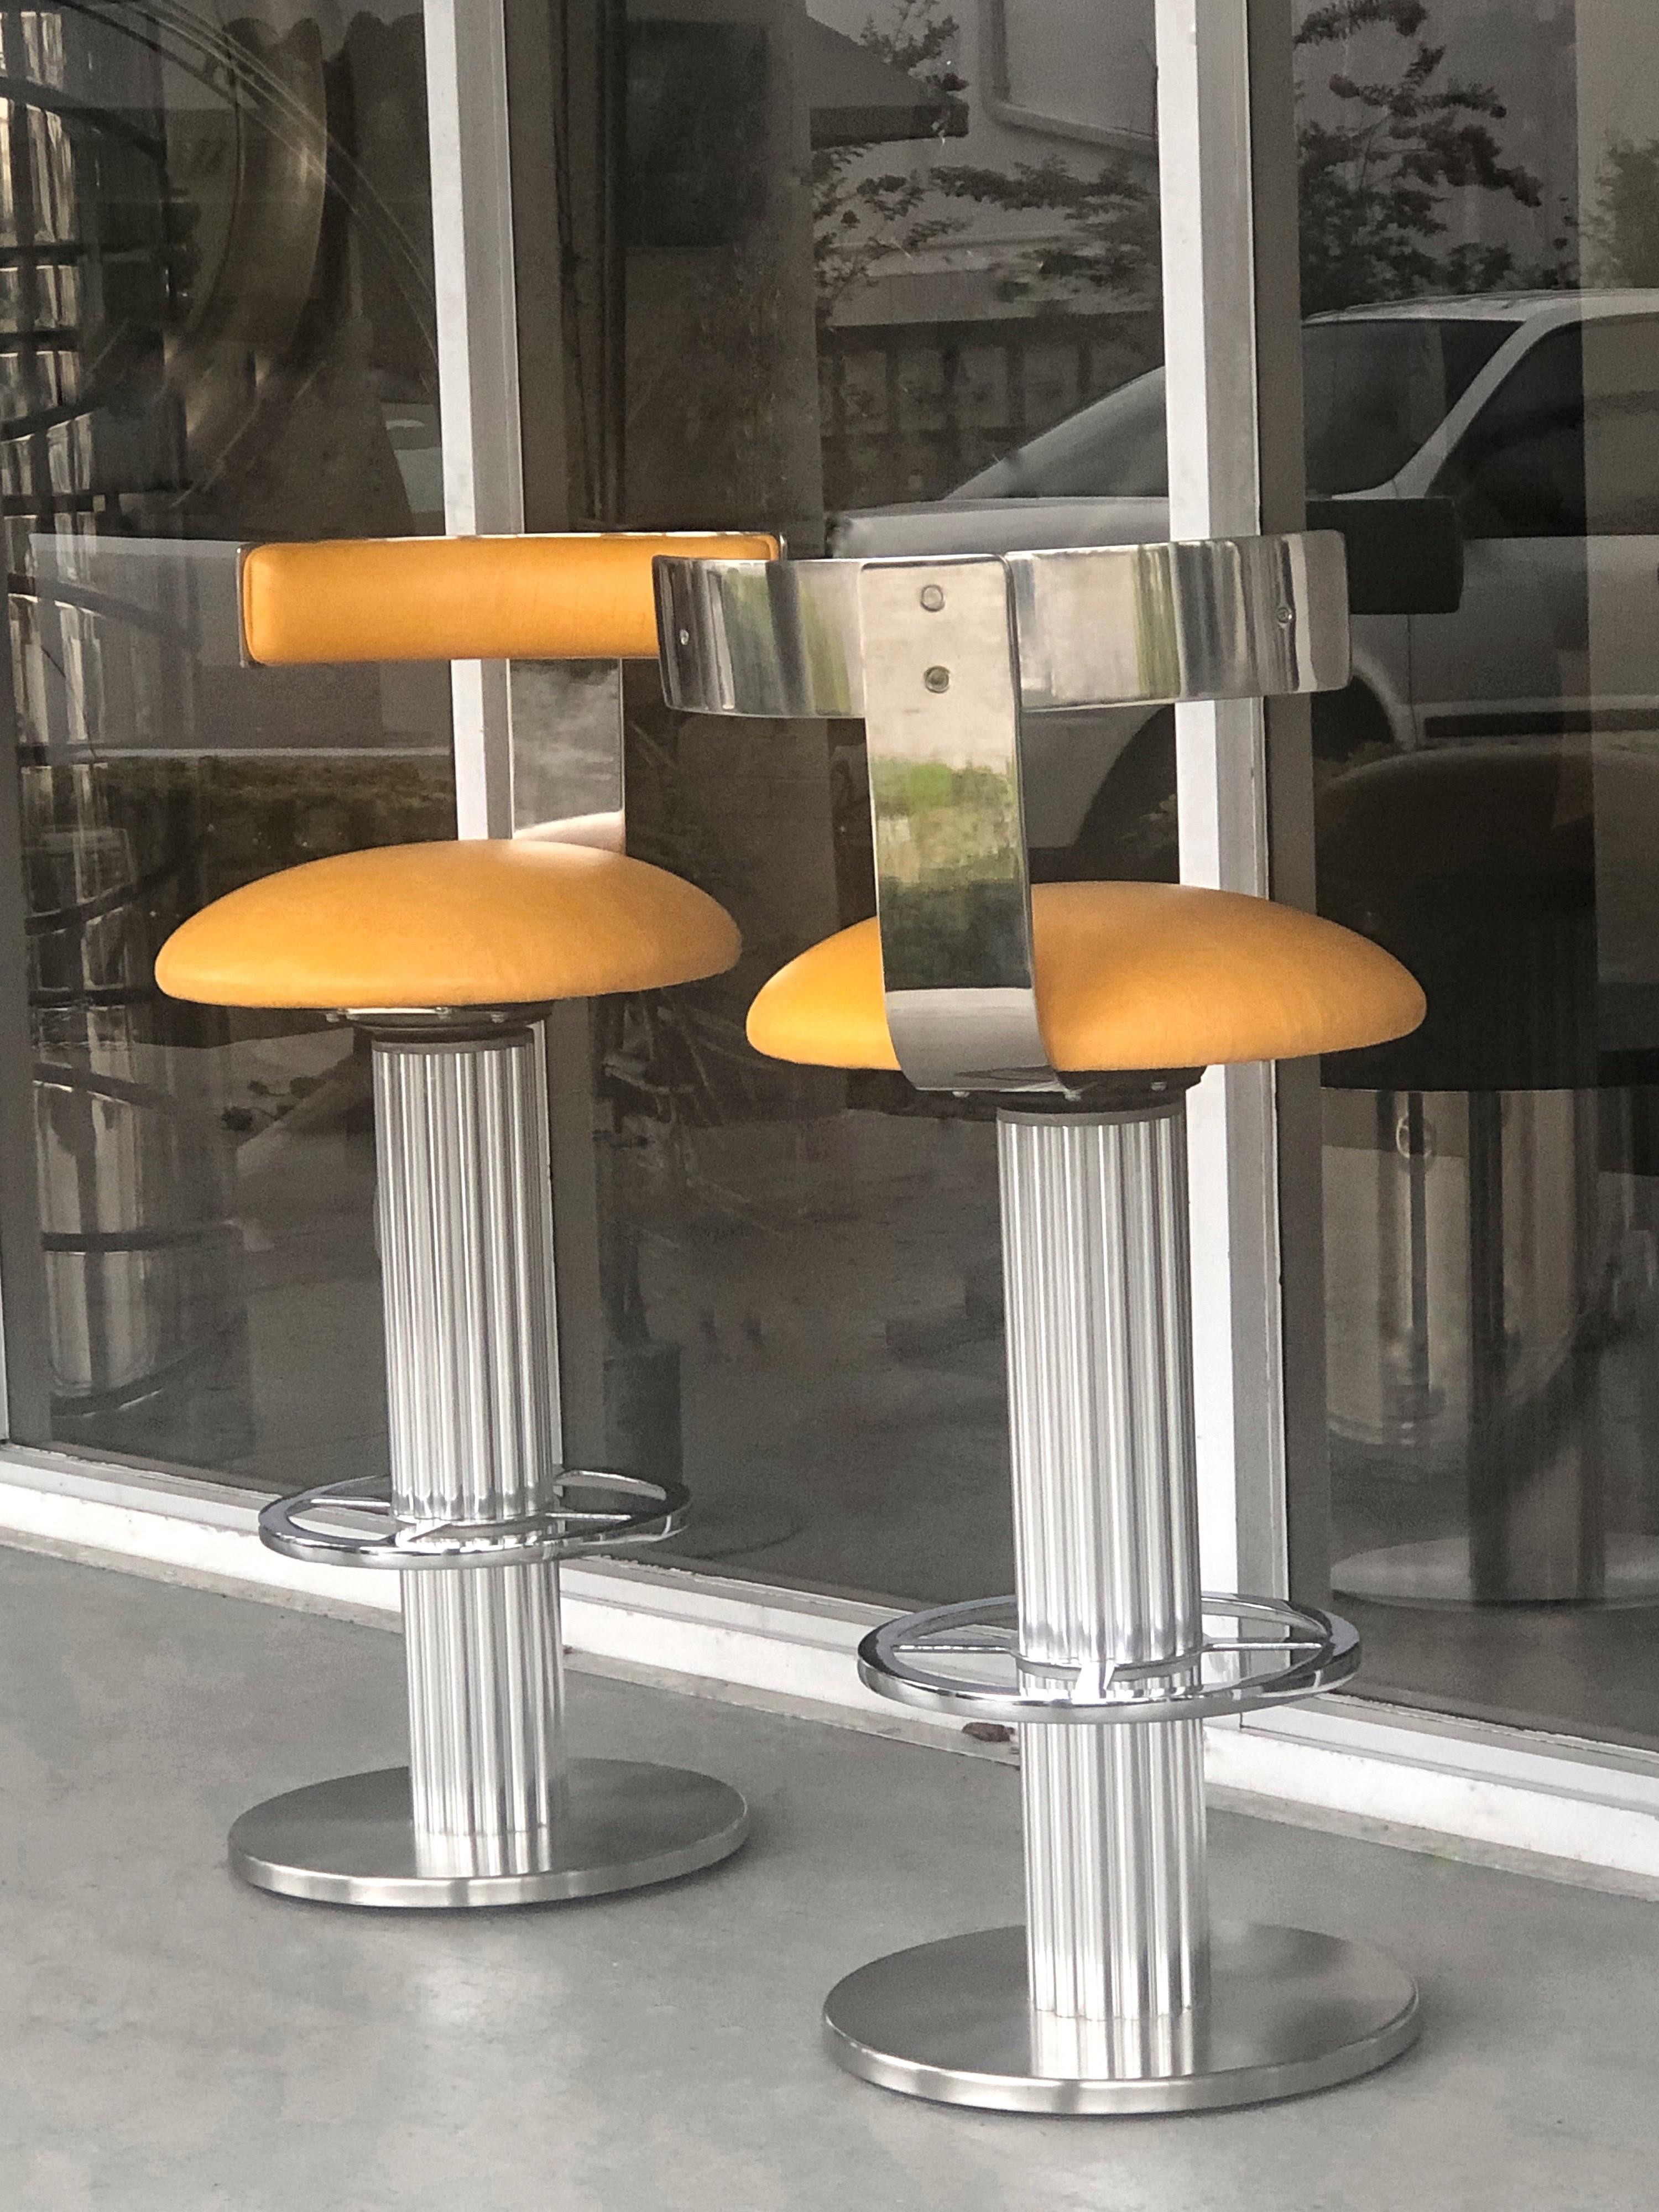 Metal Design for Leisure Pair of Yellow Swivel Bar Stools, 1980s